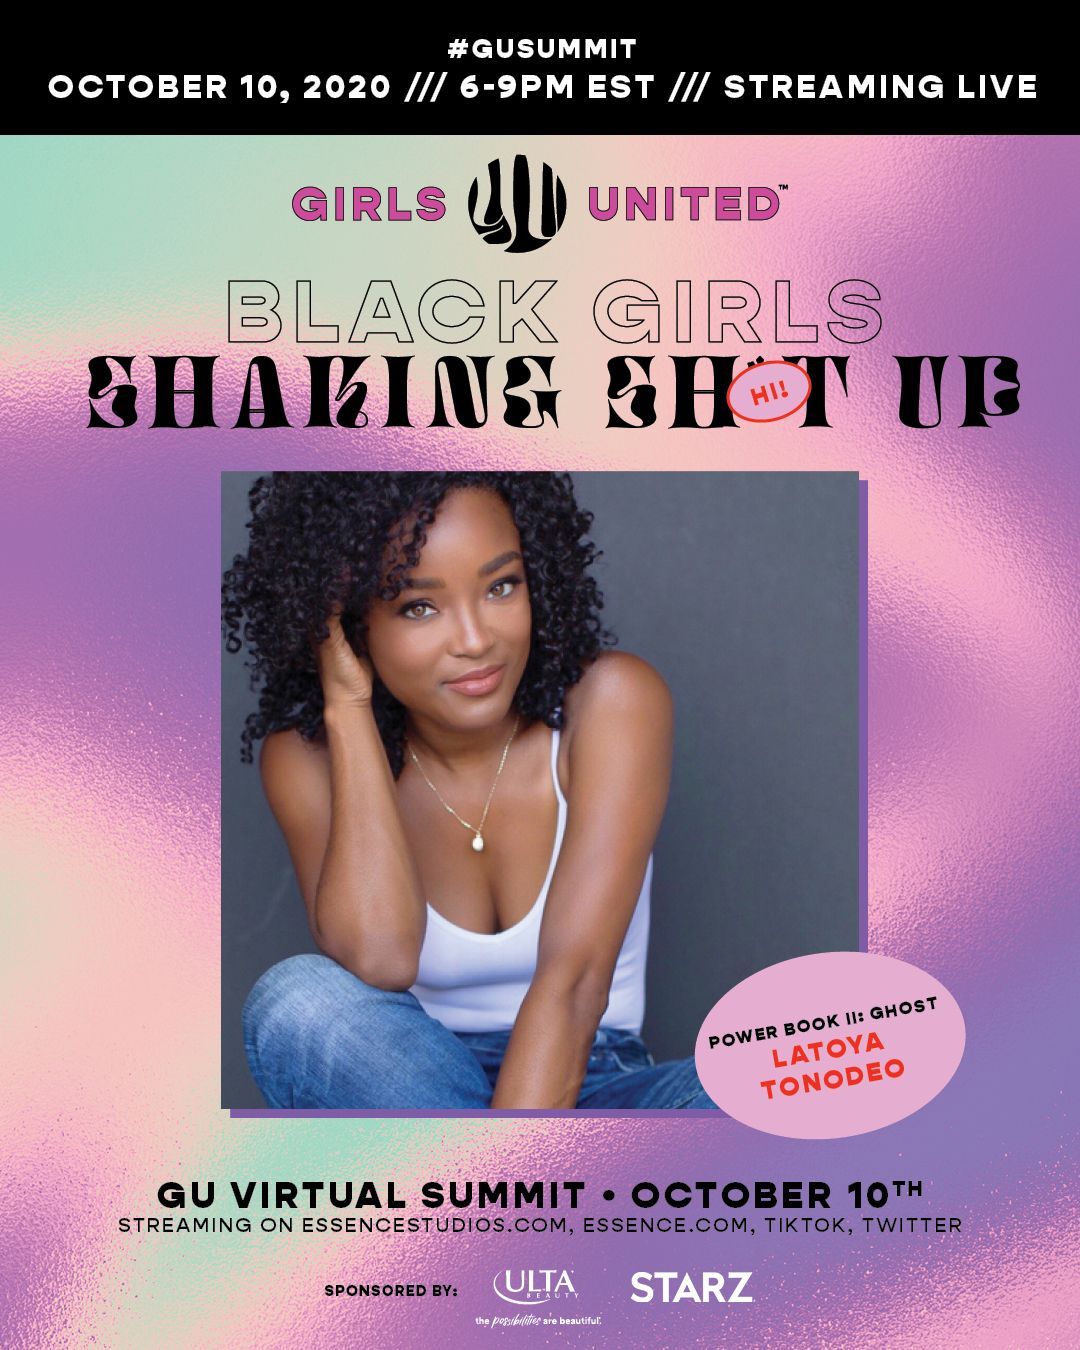 Choyce Brown, Paige Hurd, Michael Rainey Jr. And More Added To GU Summit Lineup!